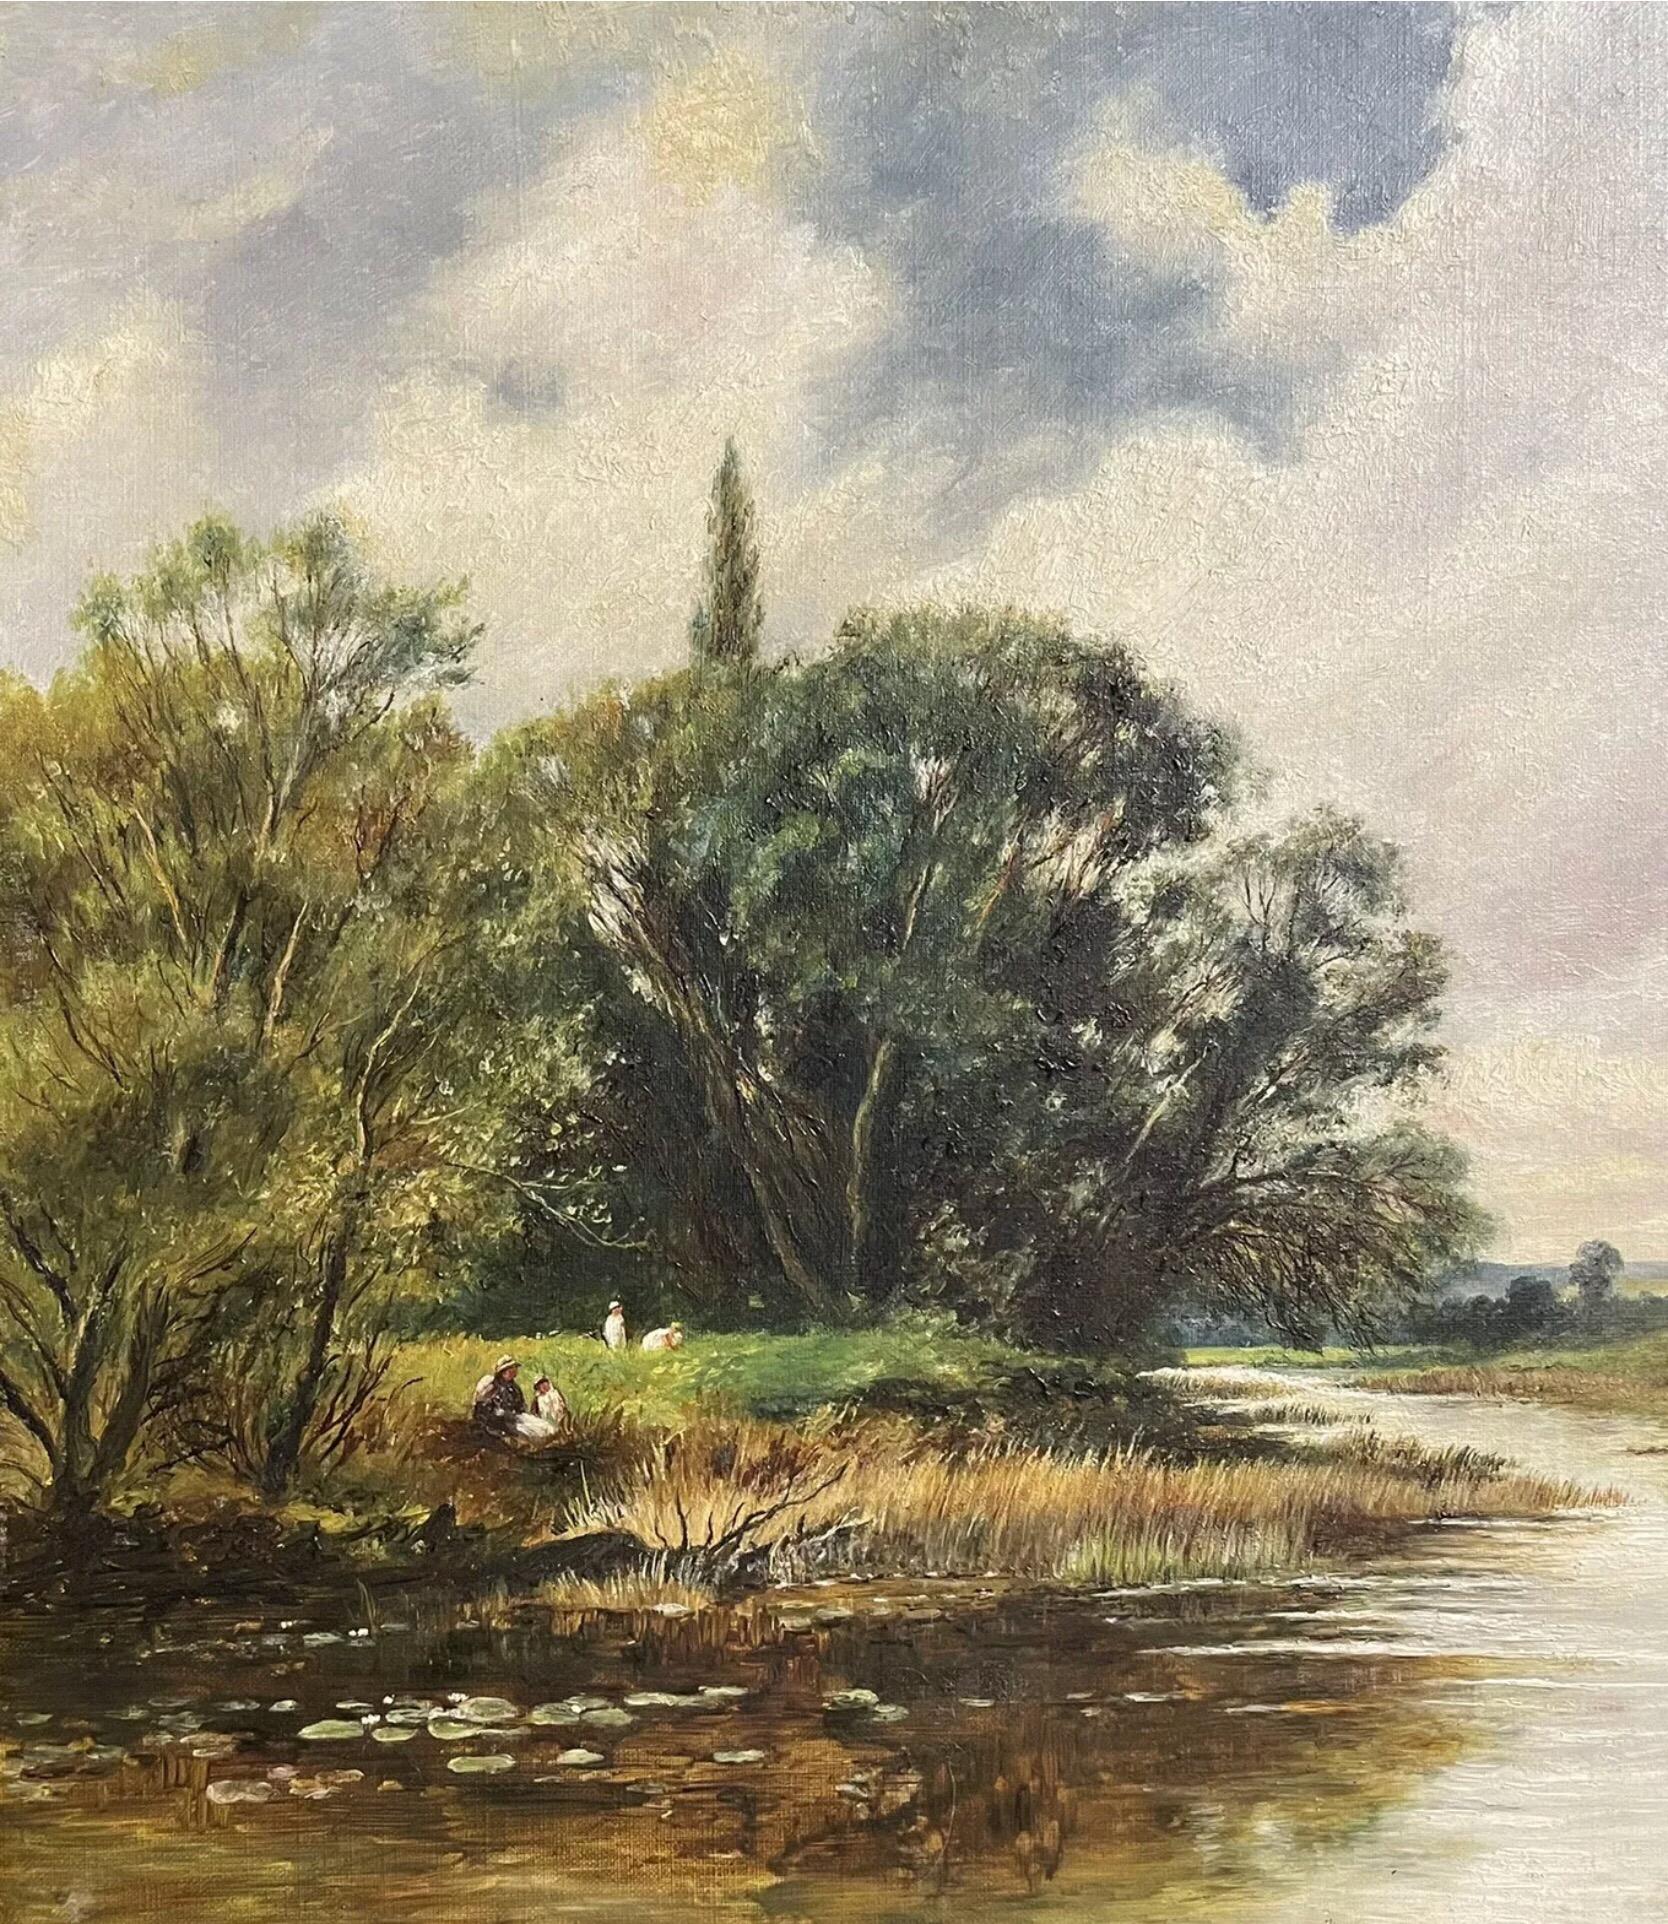 picnic by the river painting